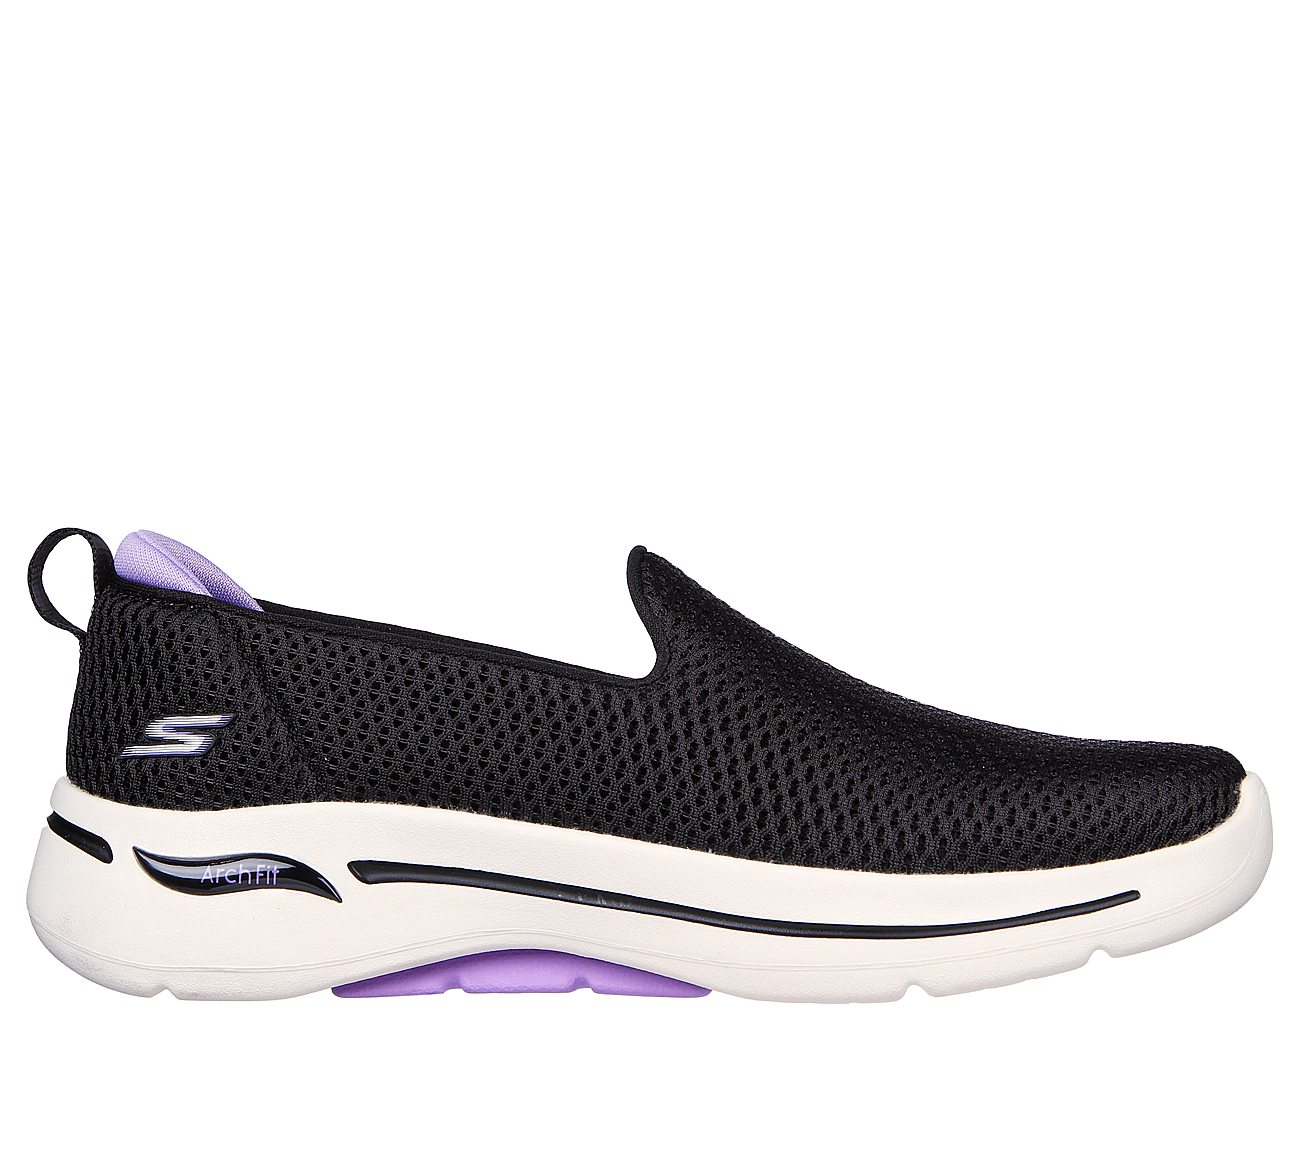 Skechers Black/Lavender Go-Wark-Arch-Fit-H Womens Slip On Shoes - Style ...